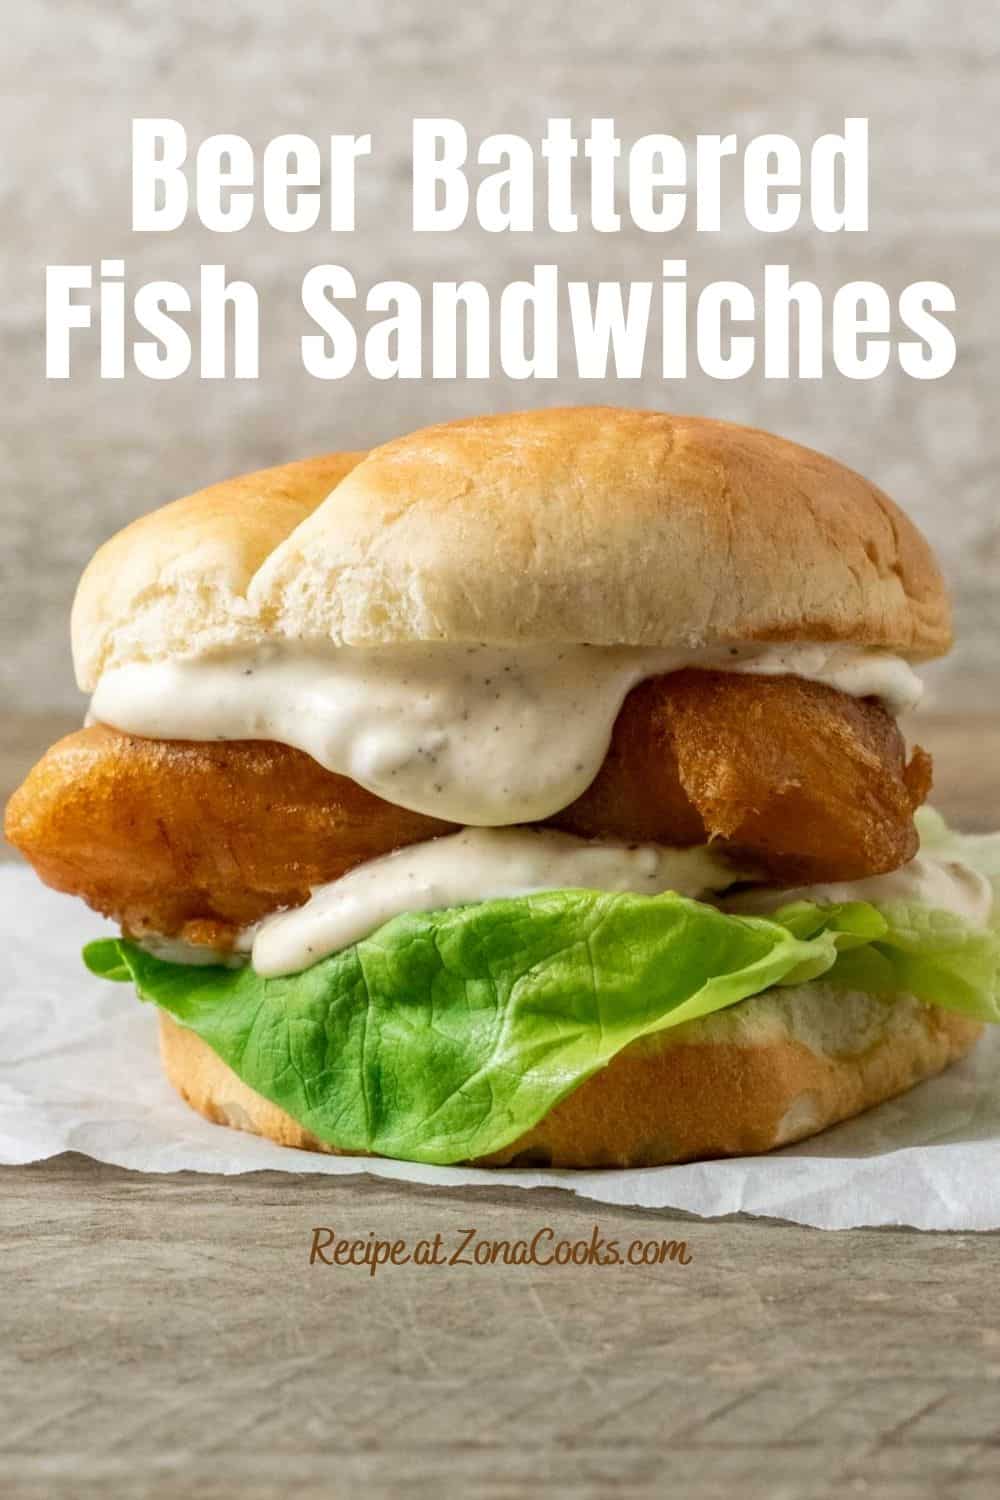 Best Beer Battered Fish Sandwiches for Two (15 min) • Zona Cooks